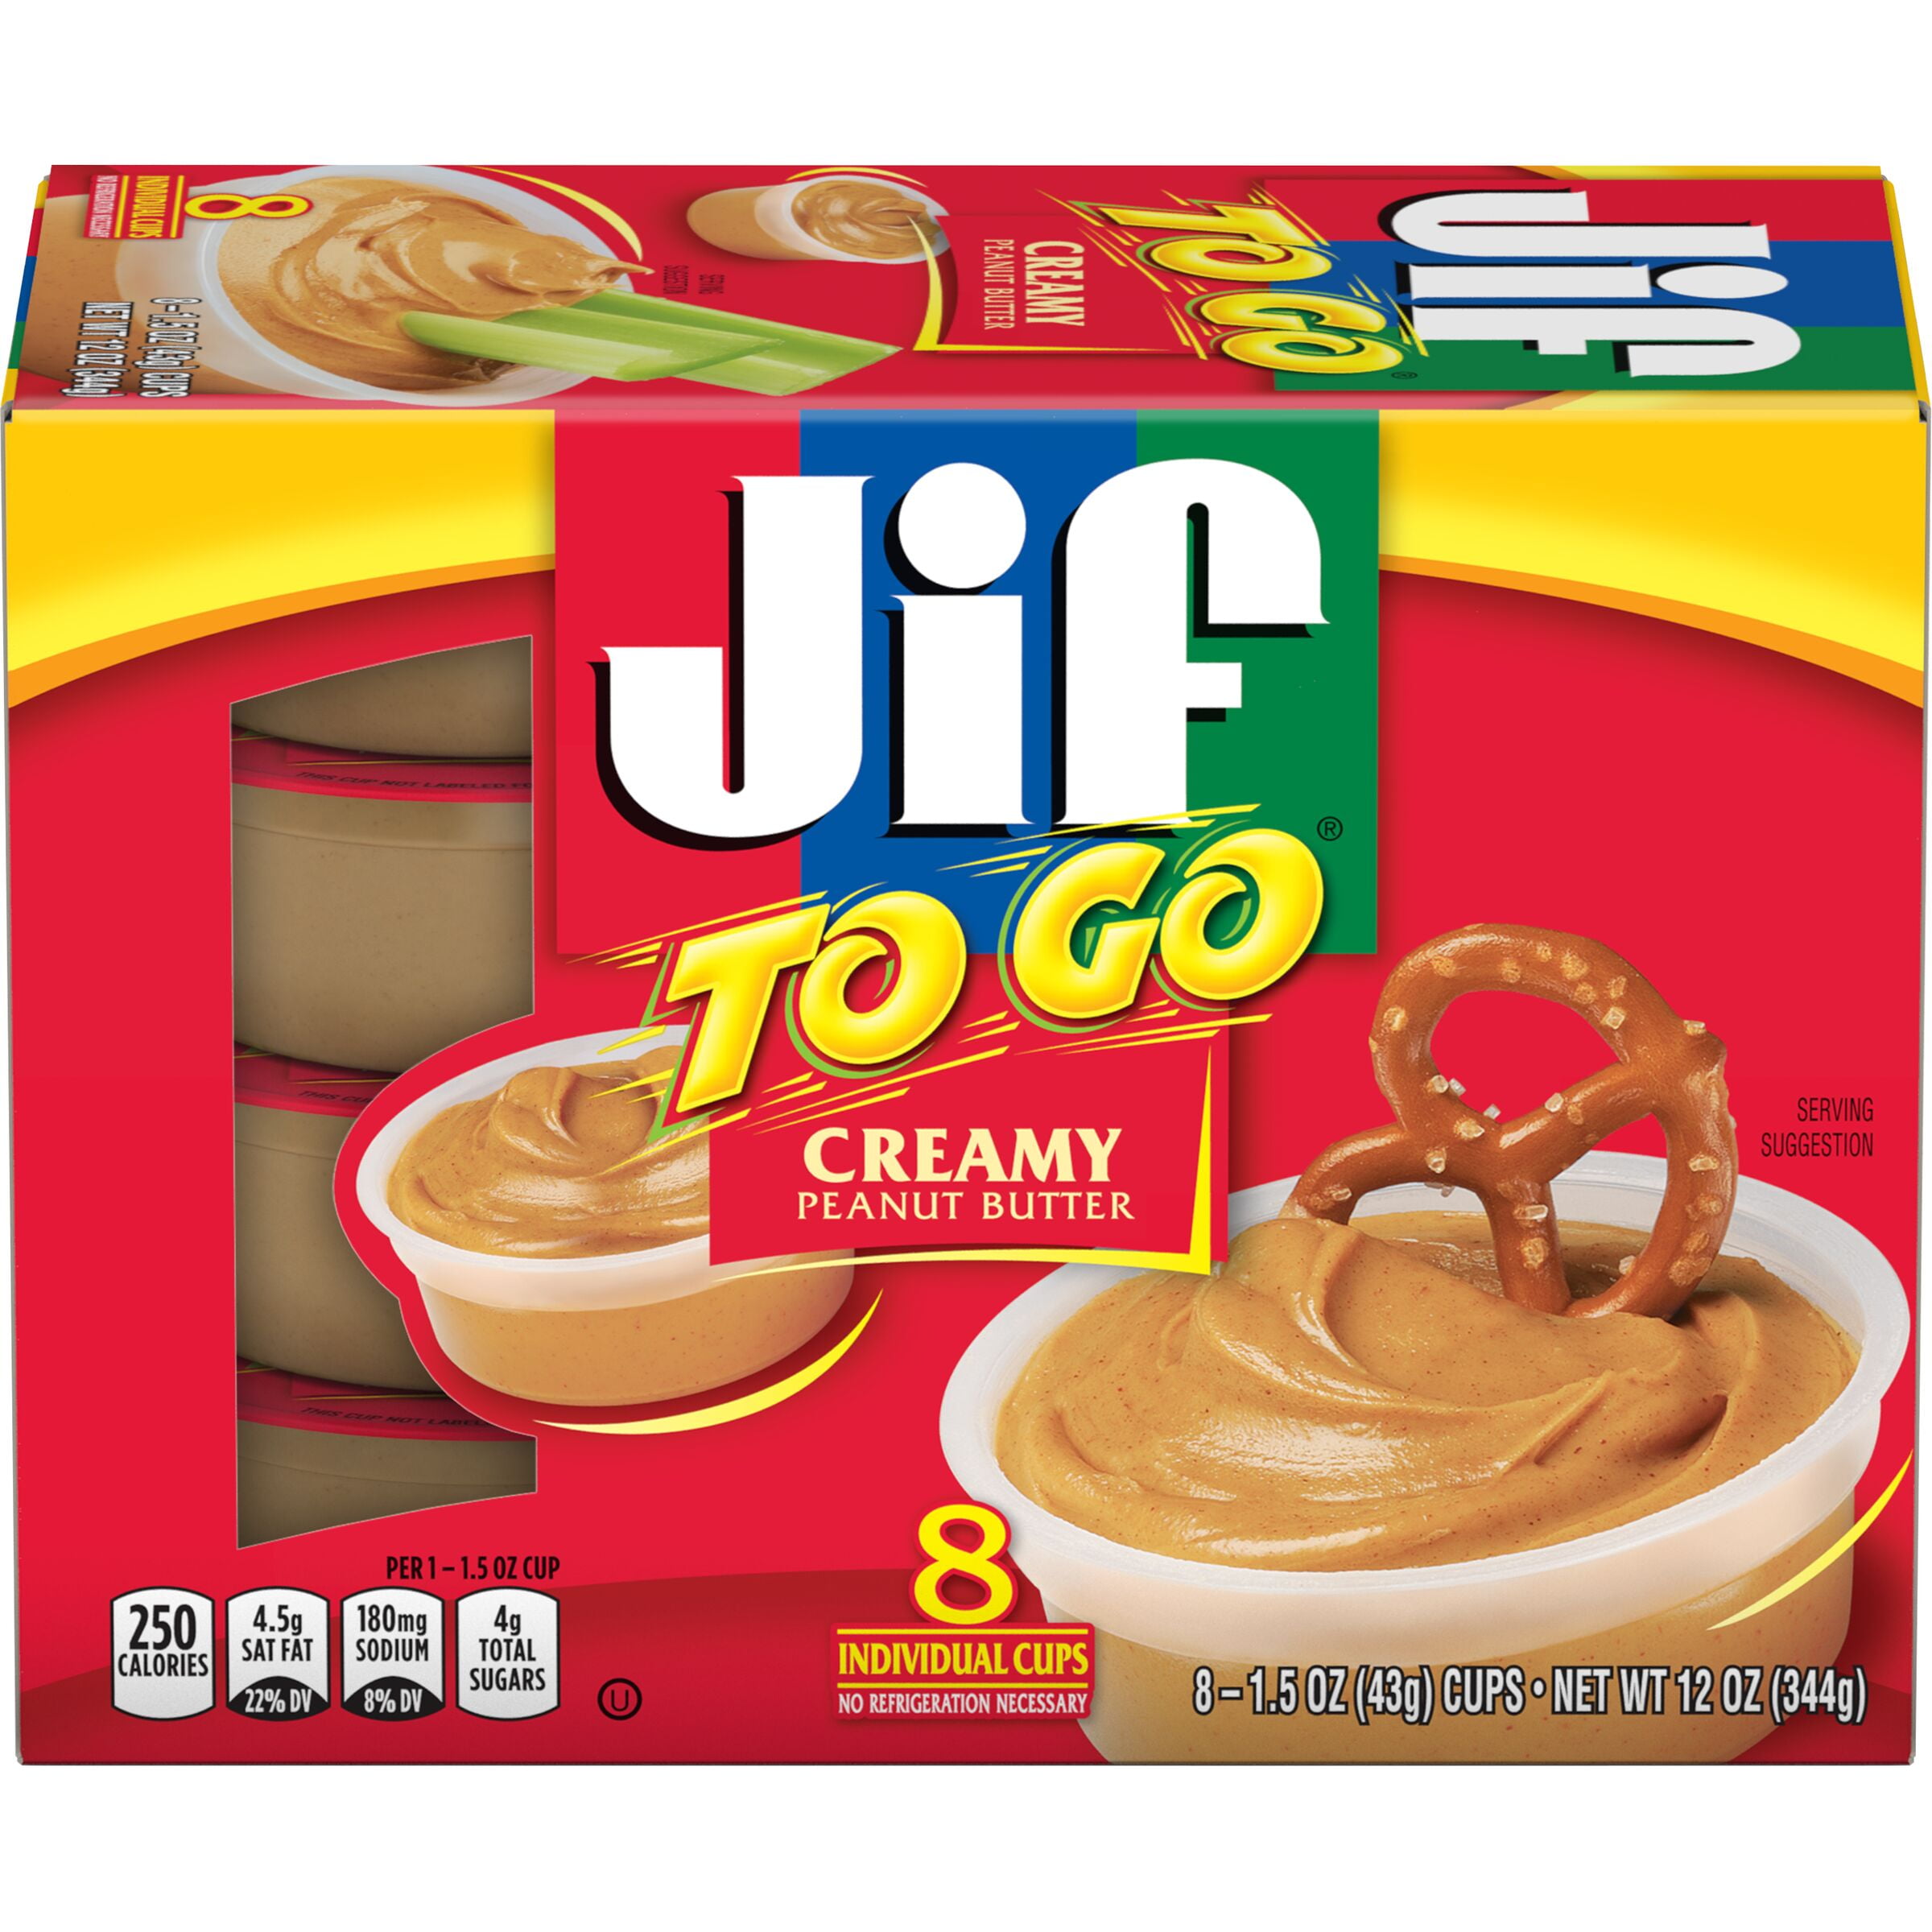 Jif To Go Peanut Butter, Creamy - 8 pack, 1.5 oz cups